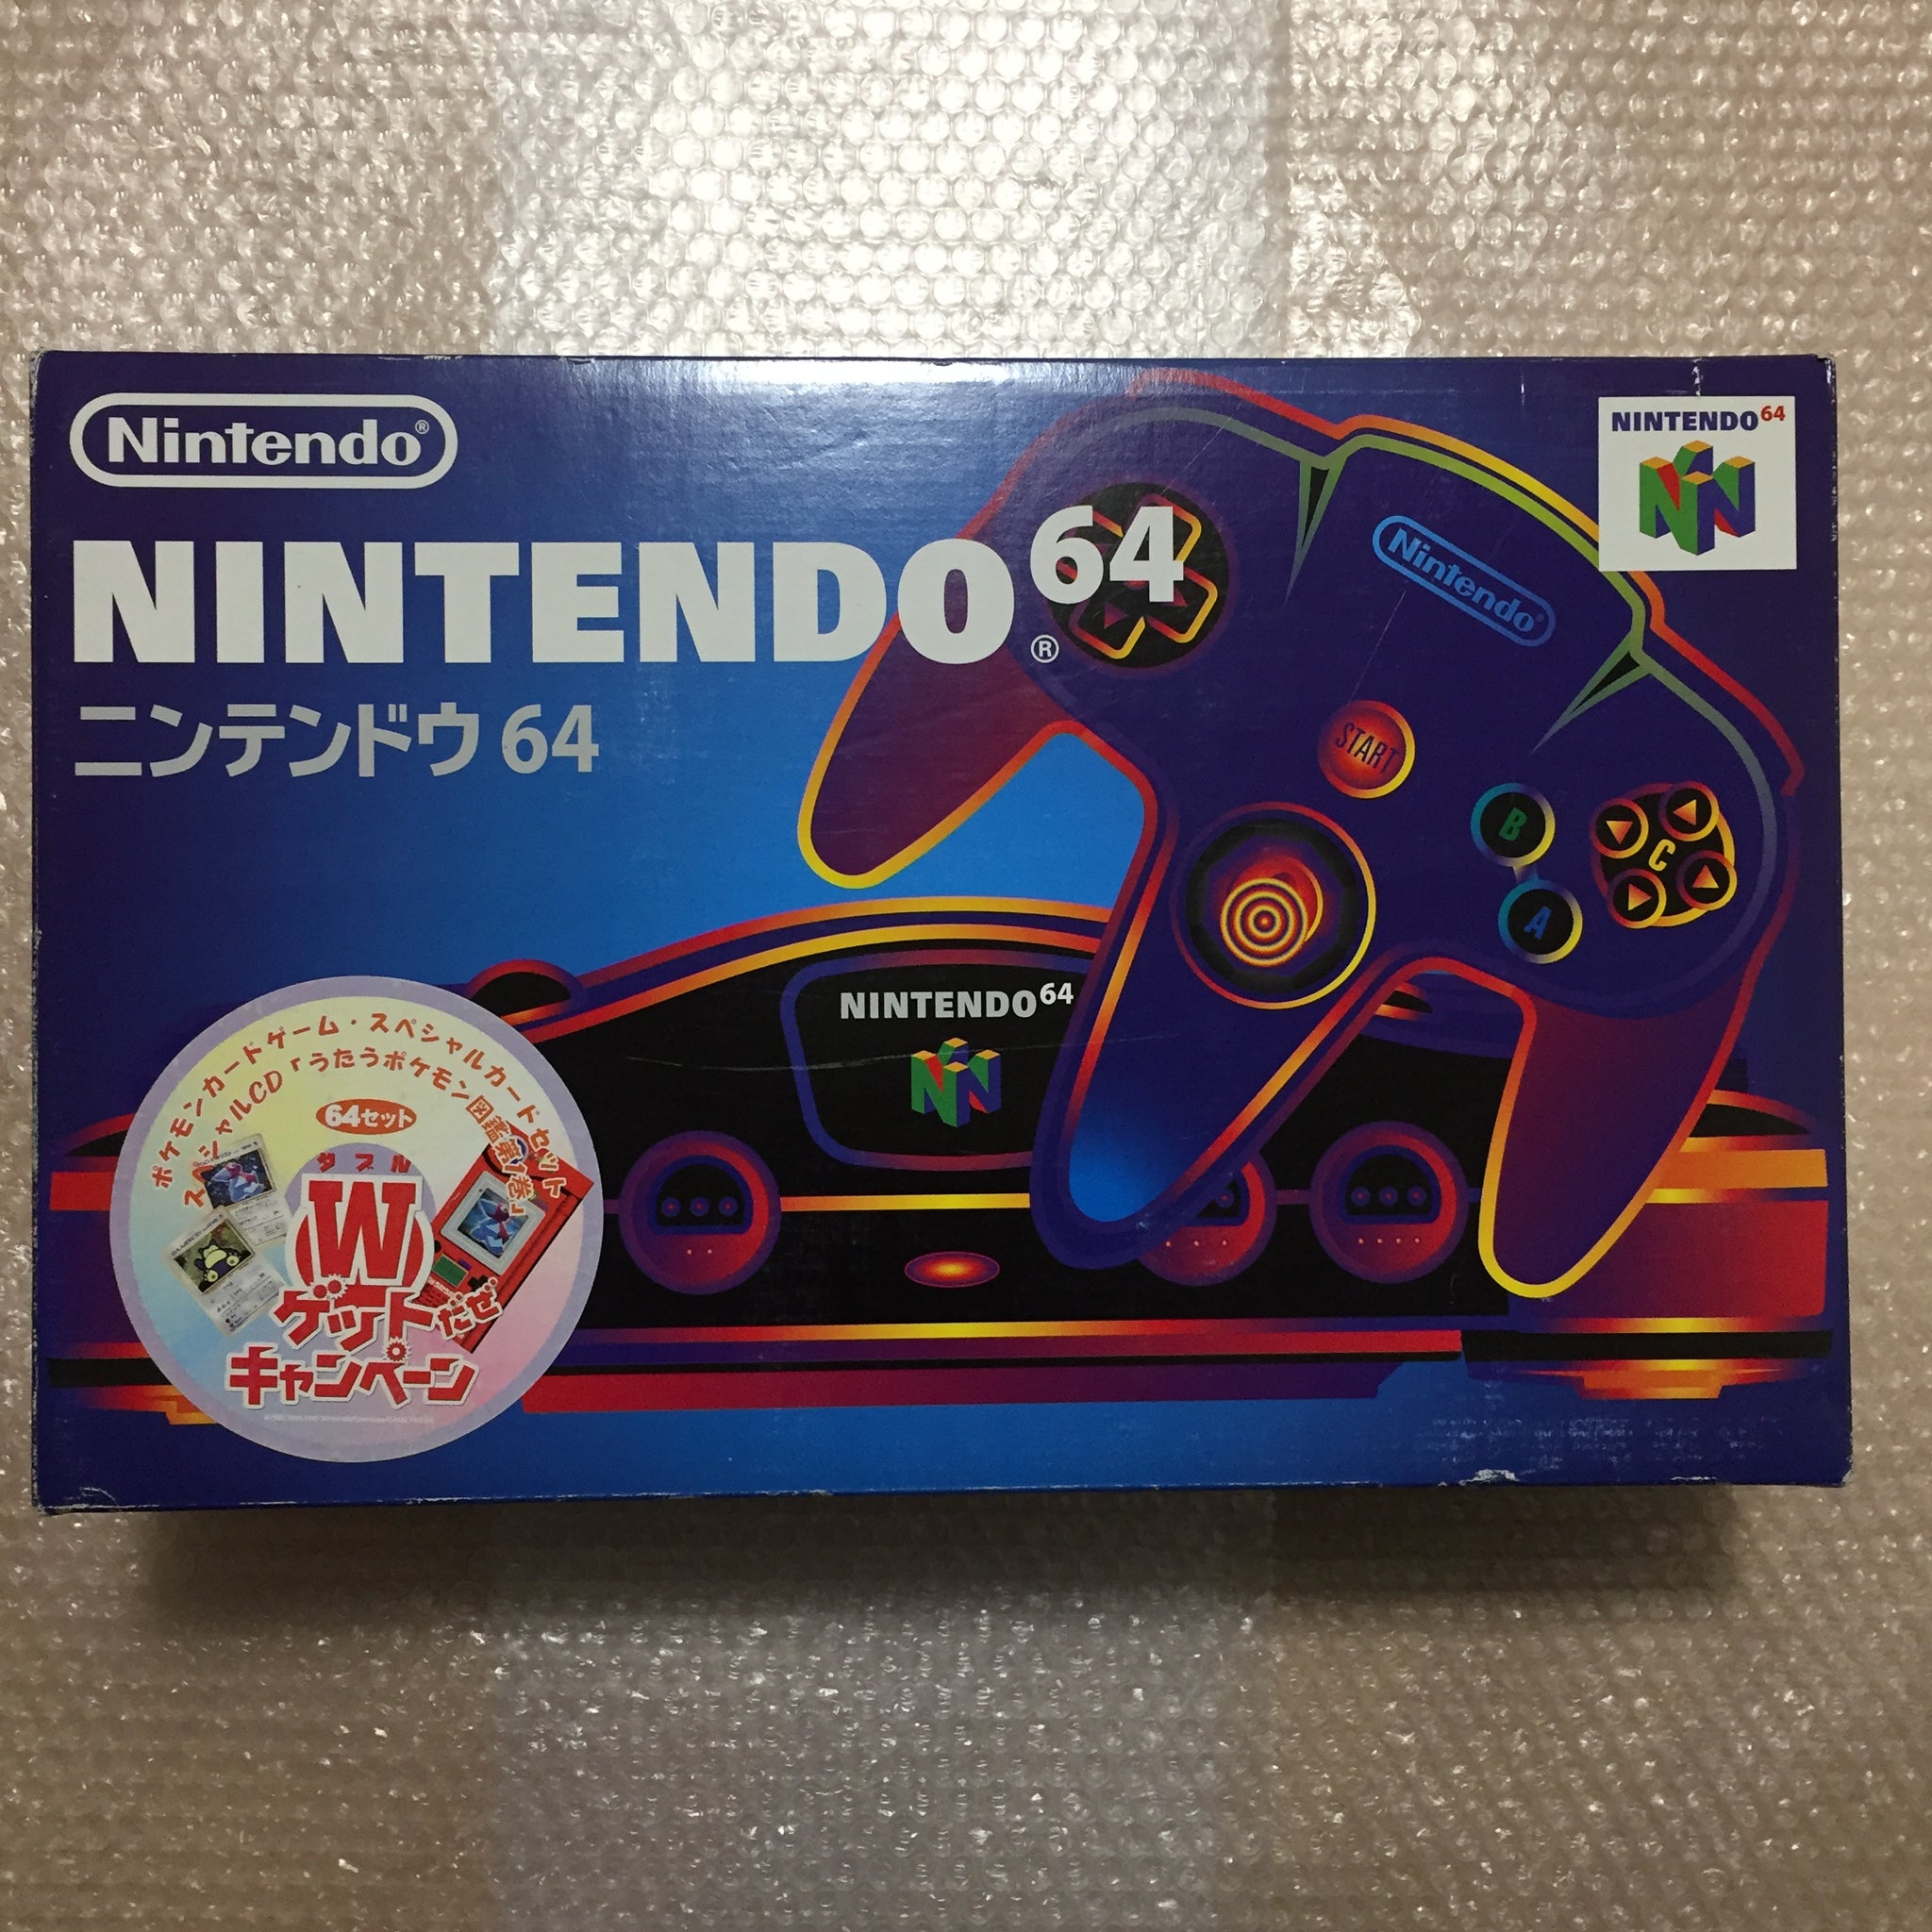 Nintendo 64 in box set with ULTRA HDMI kit - compatible with JP